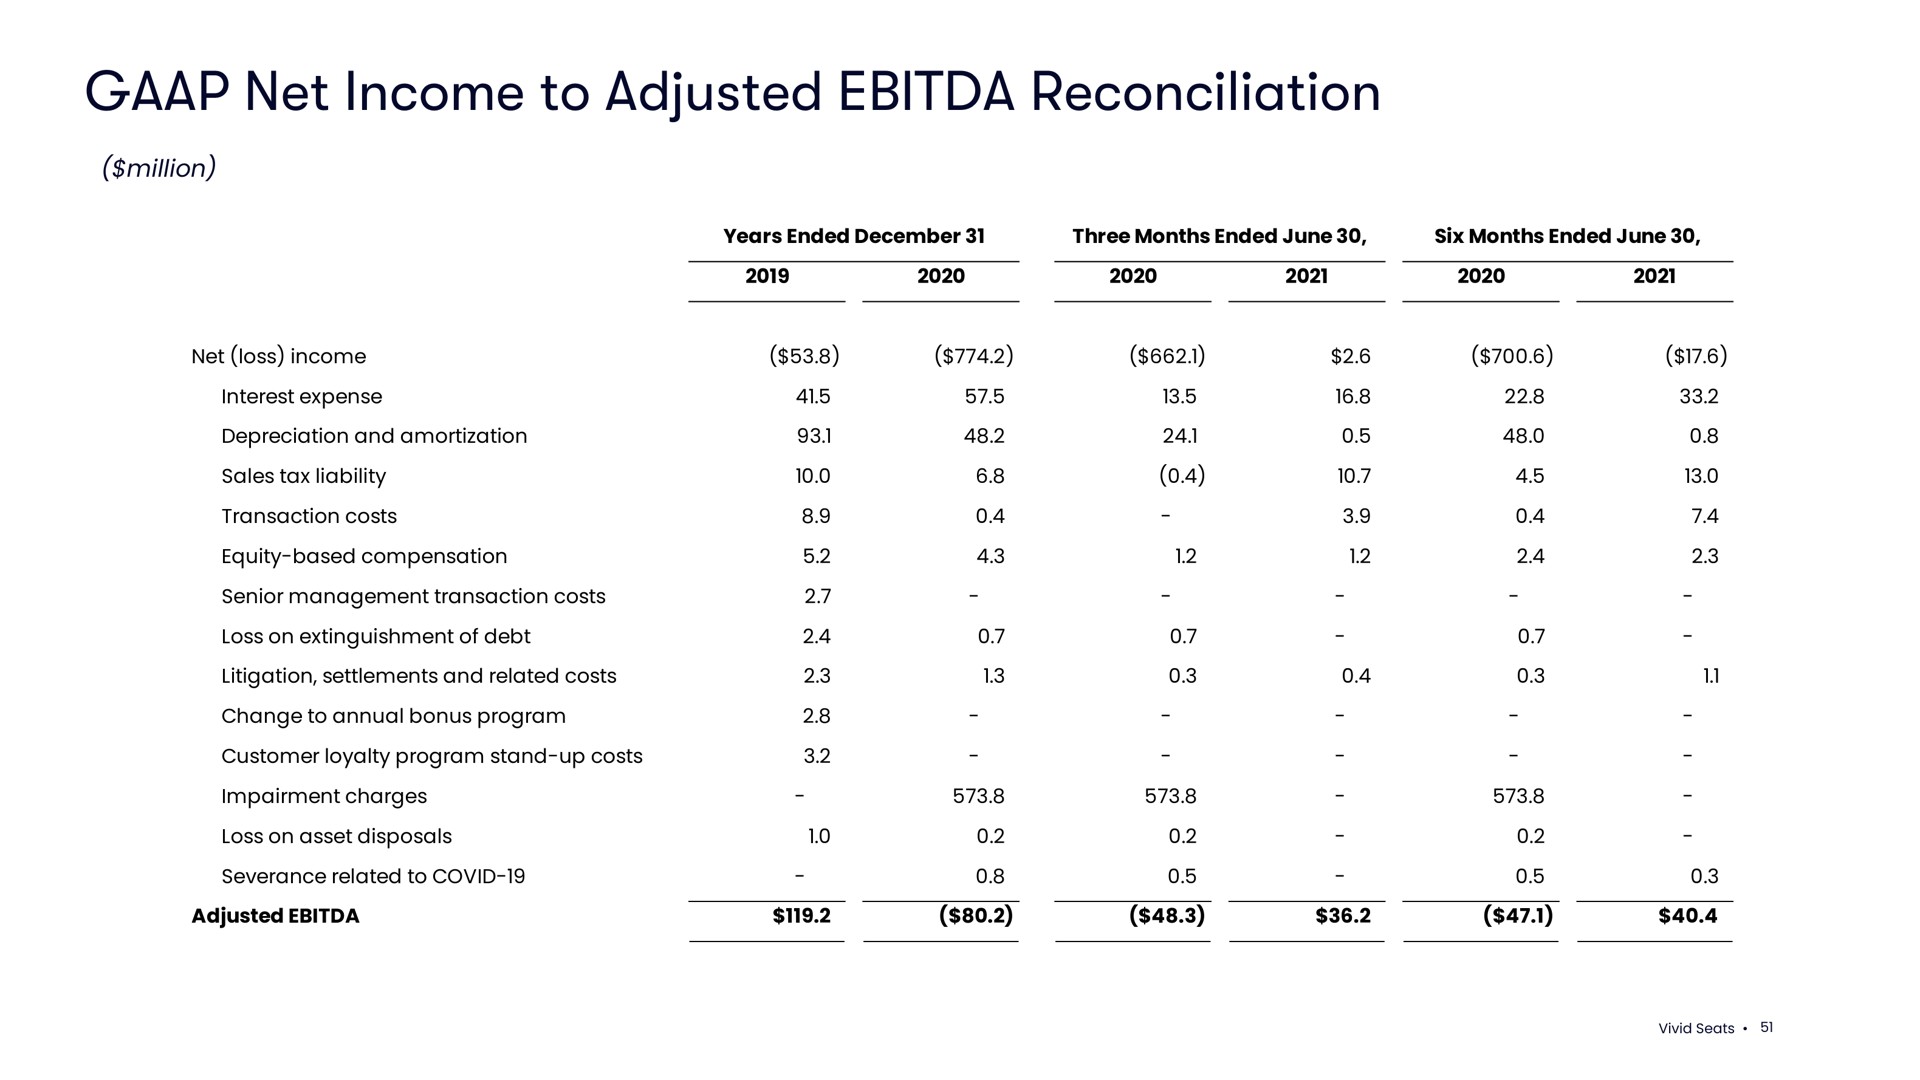 net income to adjusted reconciliation | Vivid Seats